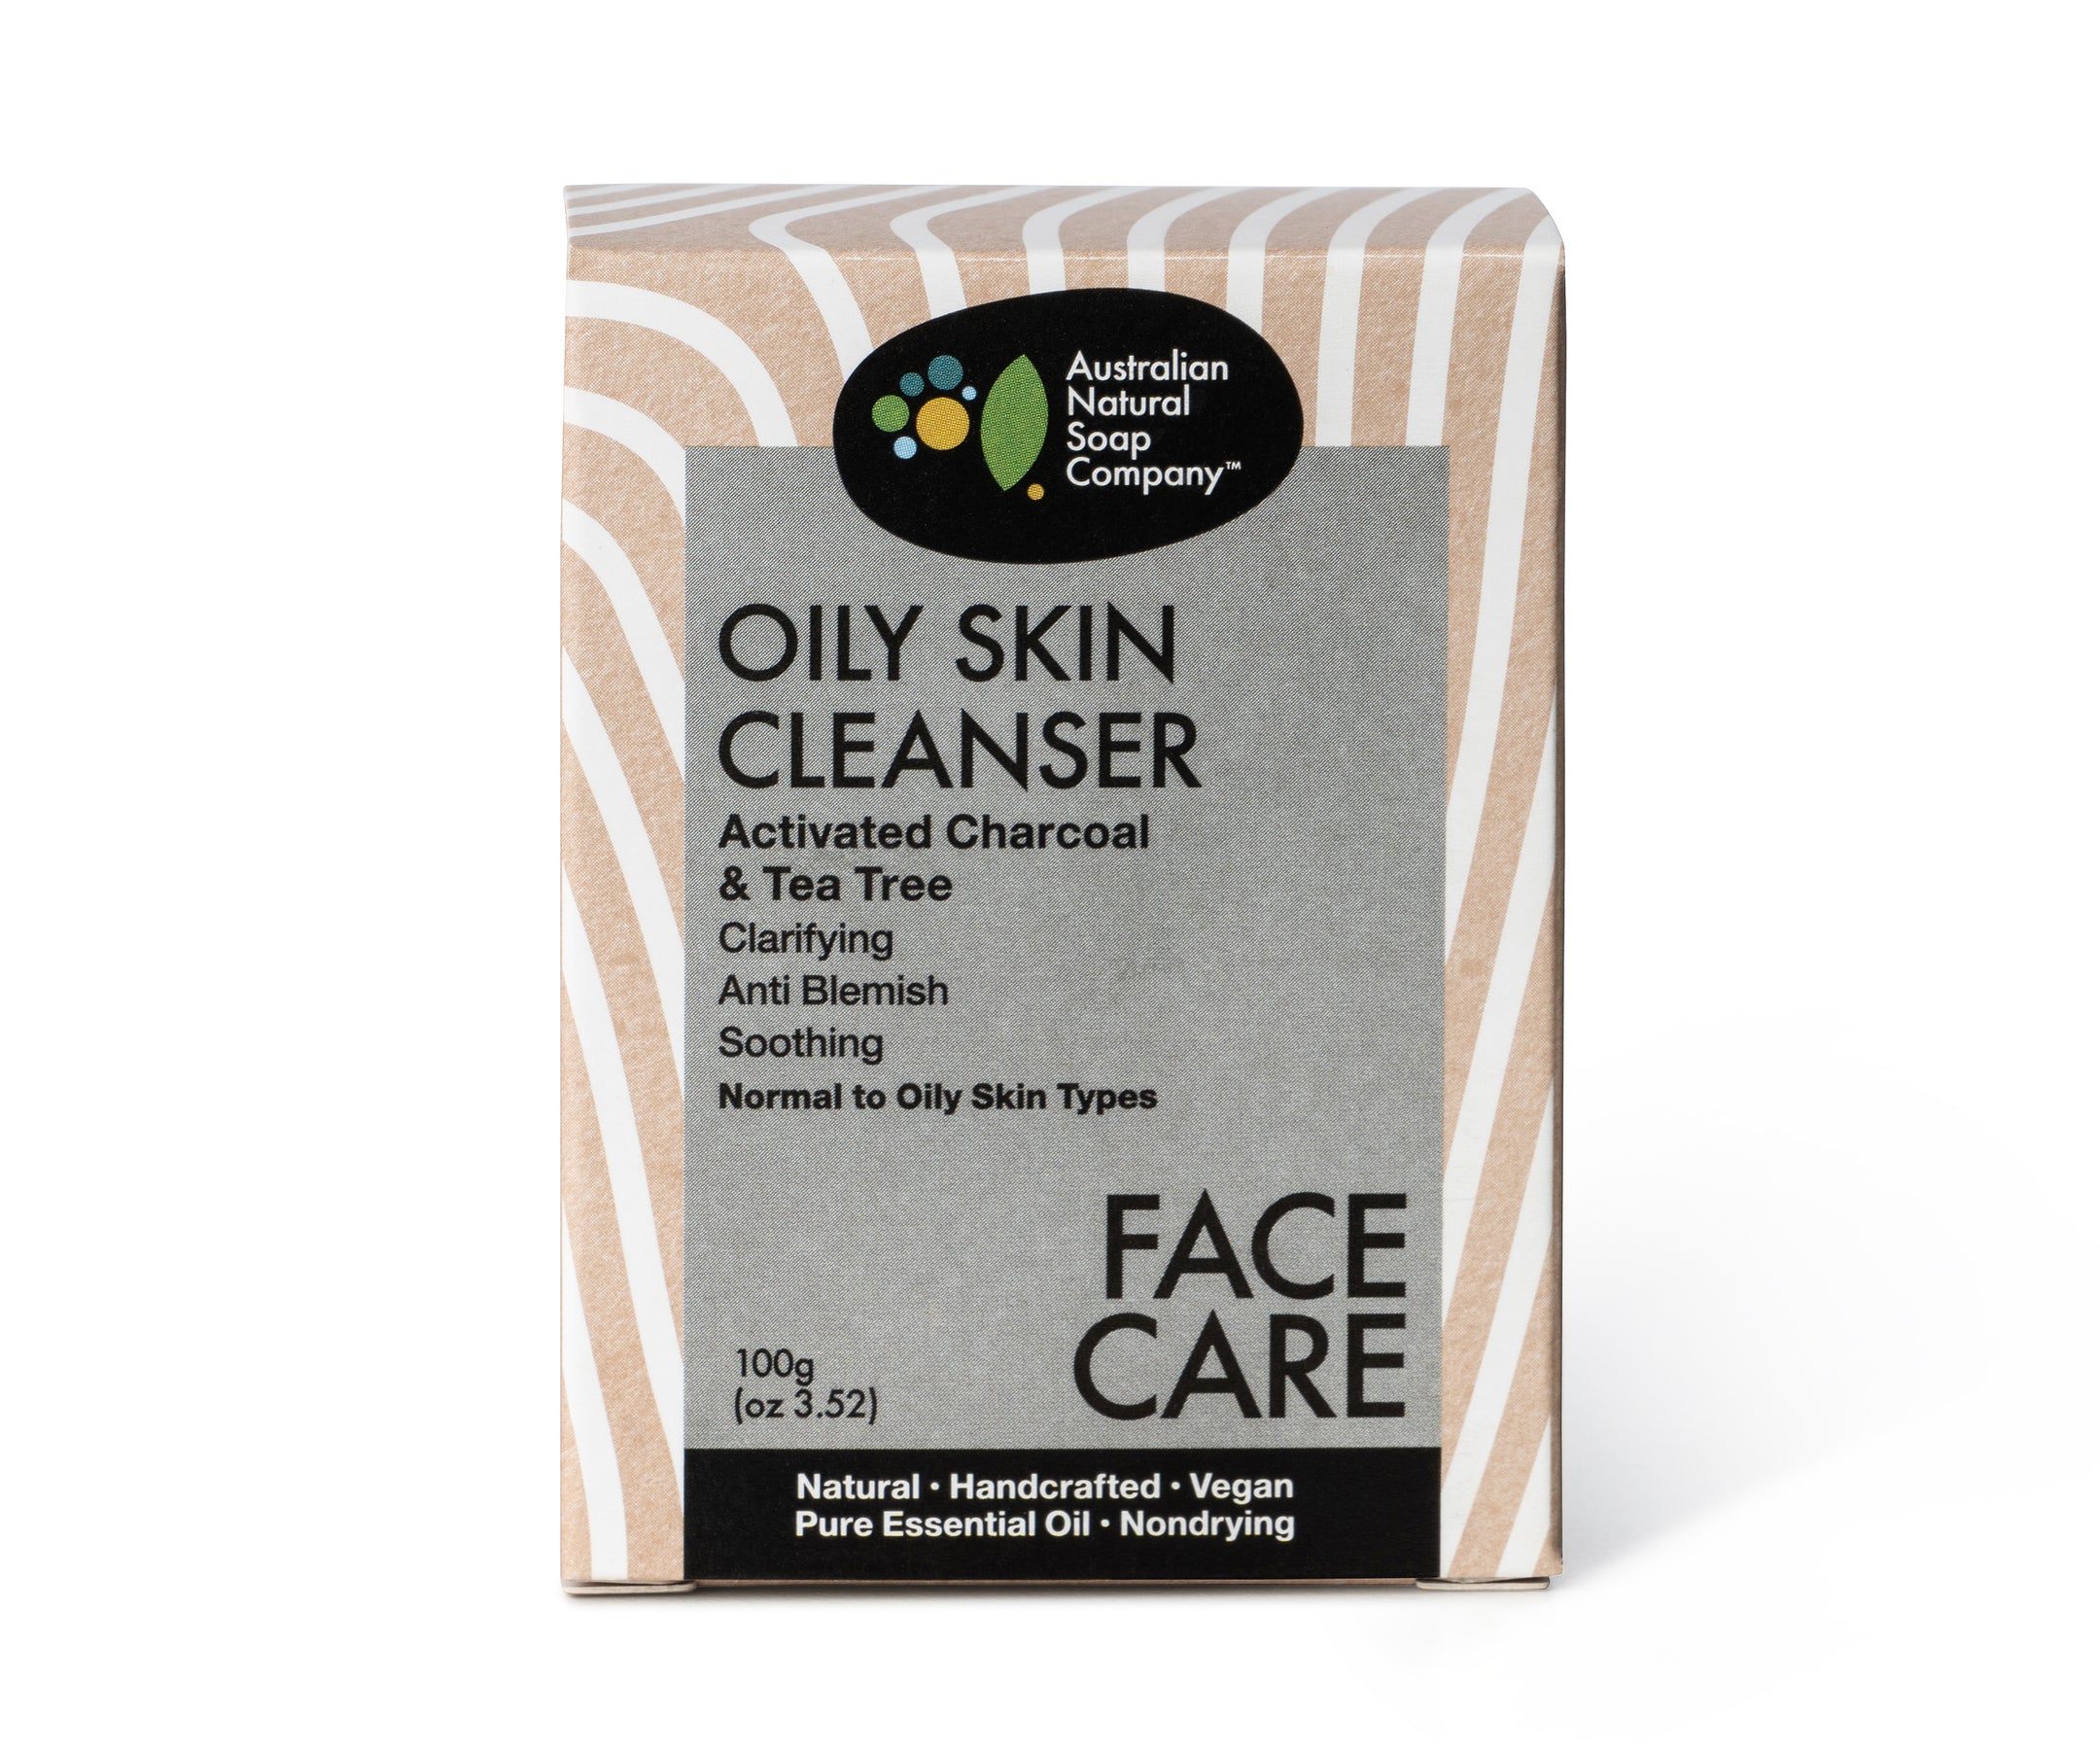 Australian Natural Soap Company - Face Cleanser - Oily Skin (100g)